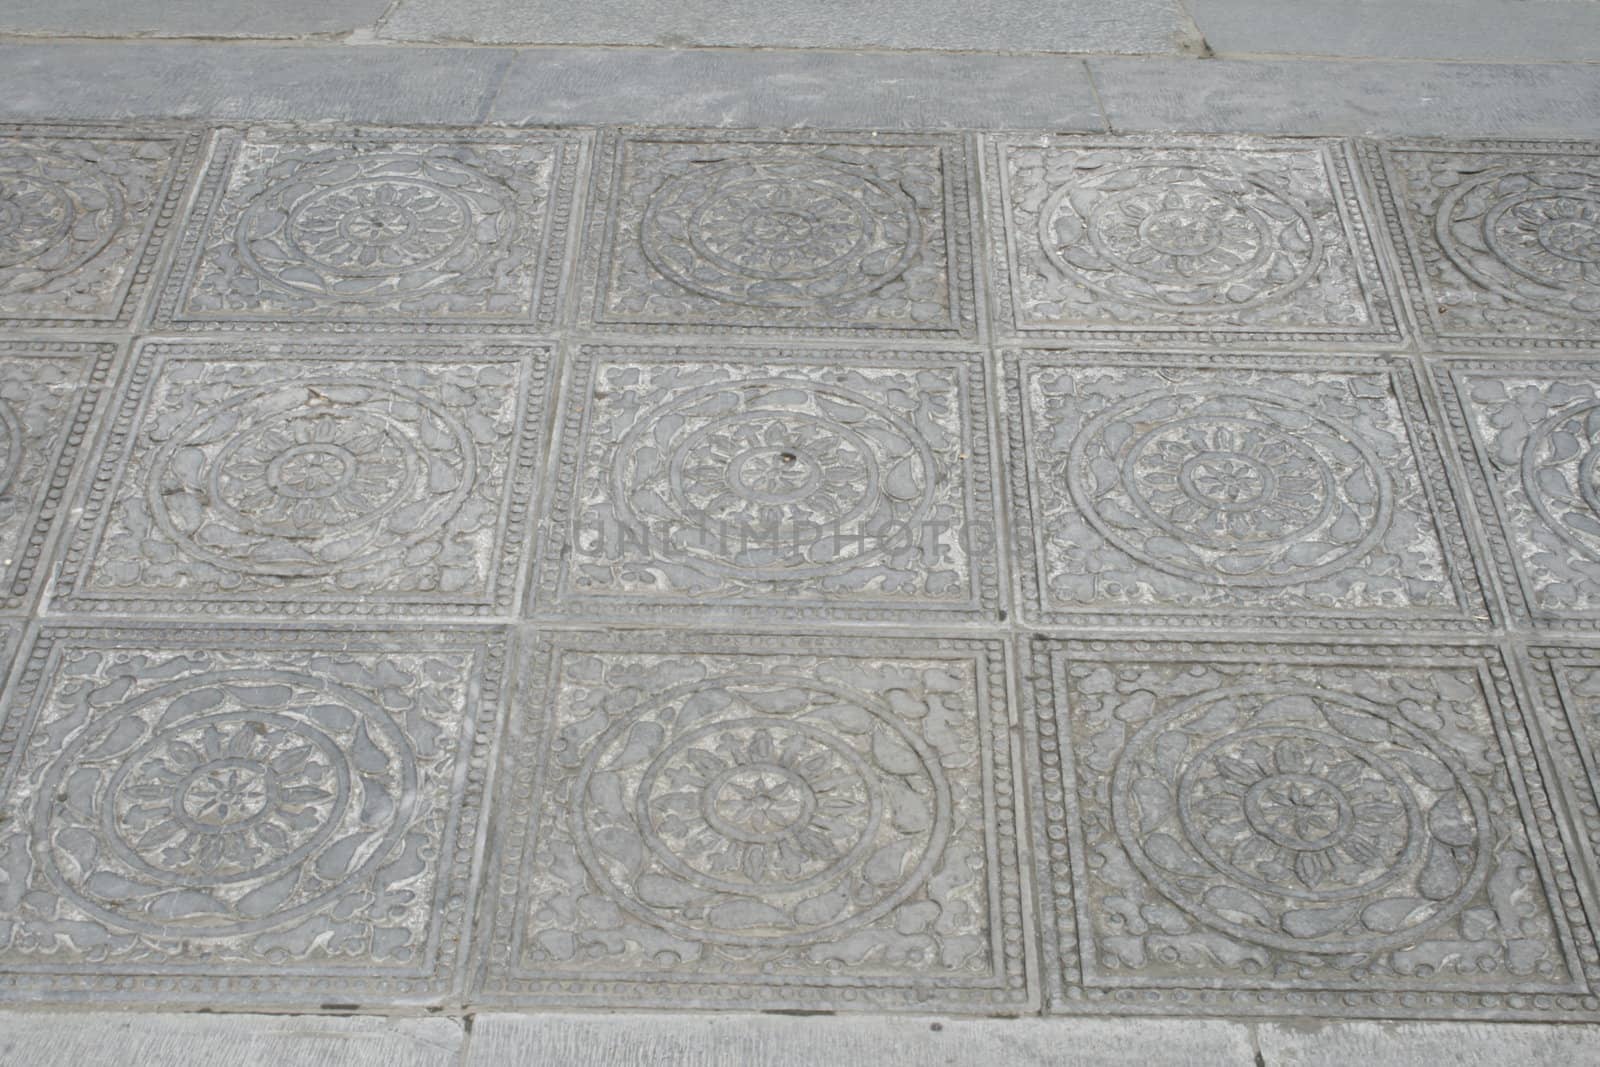 downtown of Xian, Floor tiles in front of the draw by koep